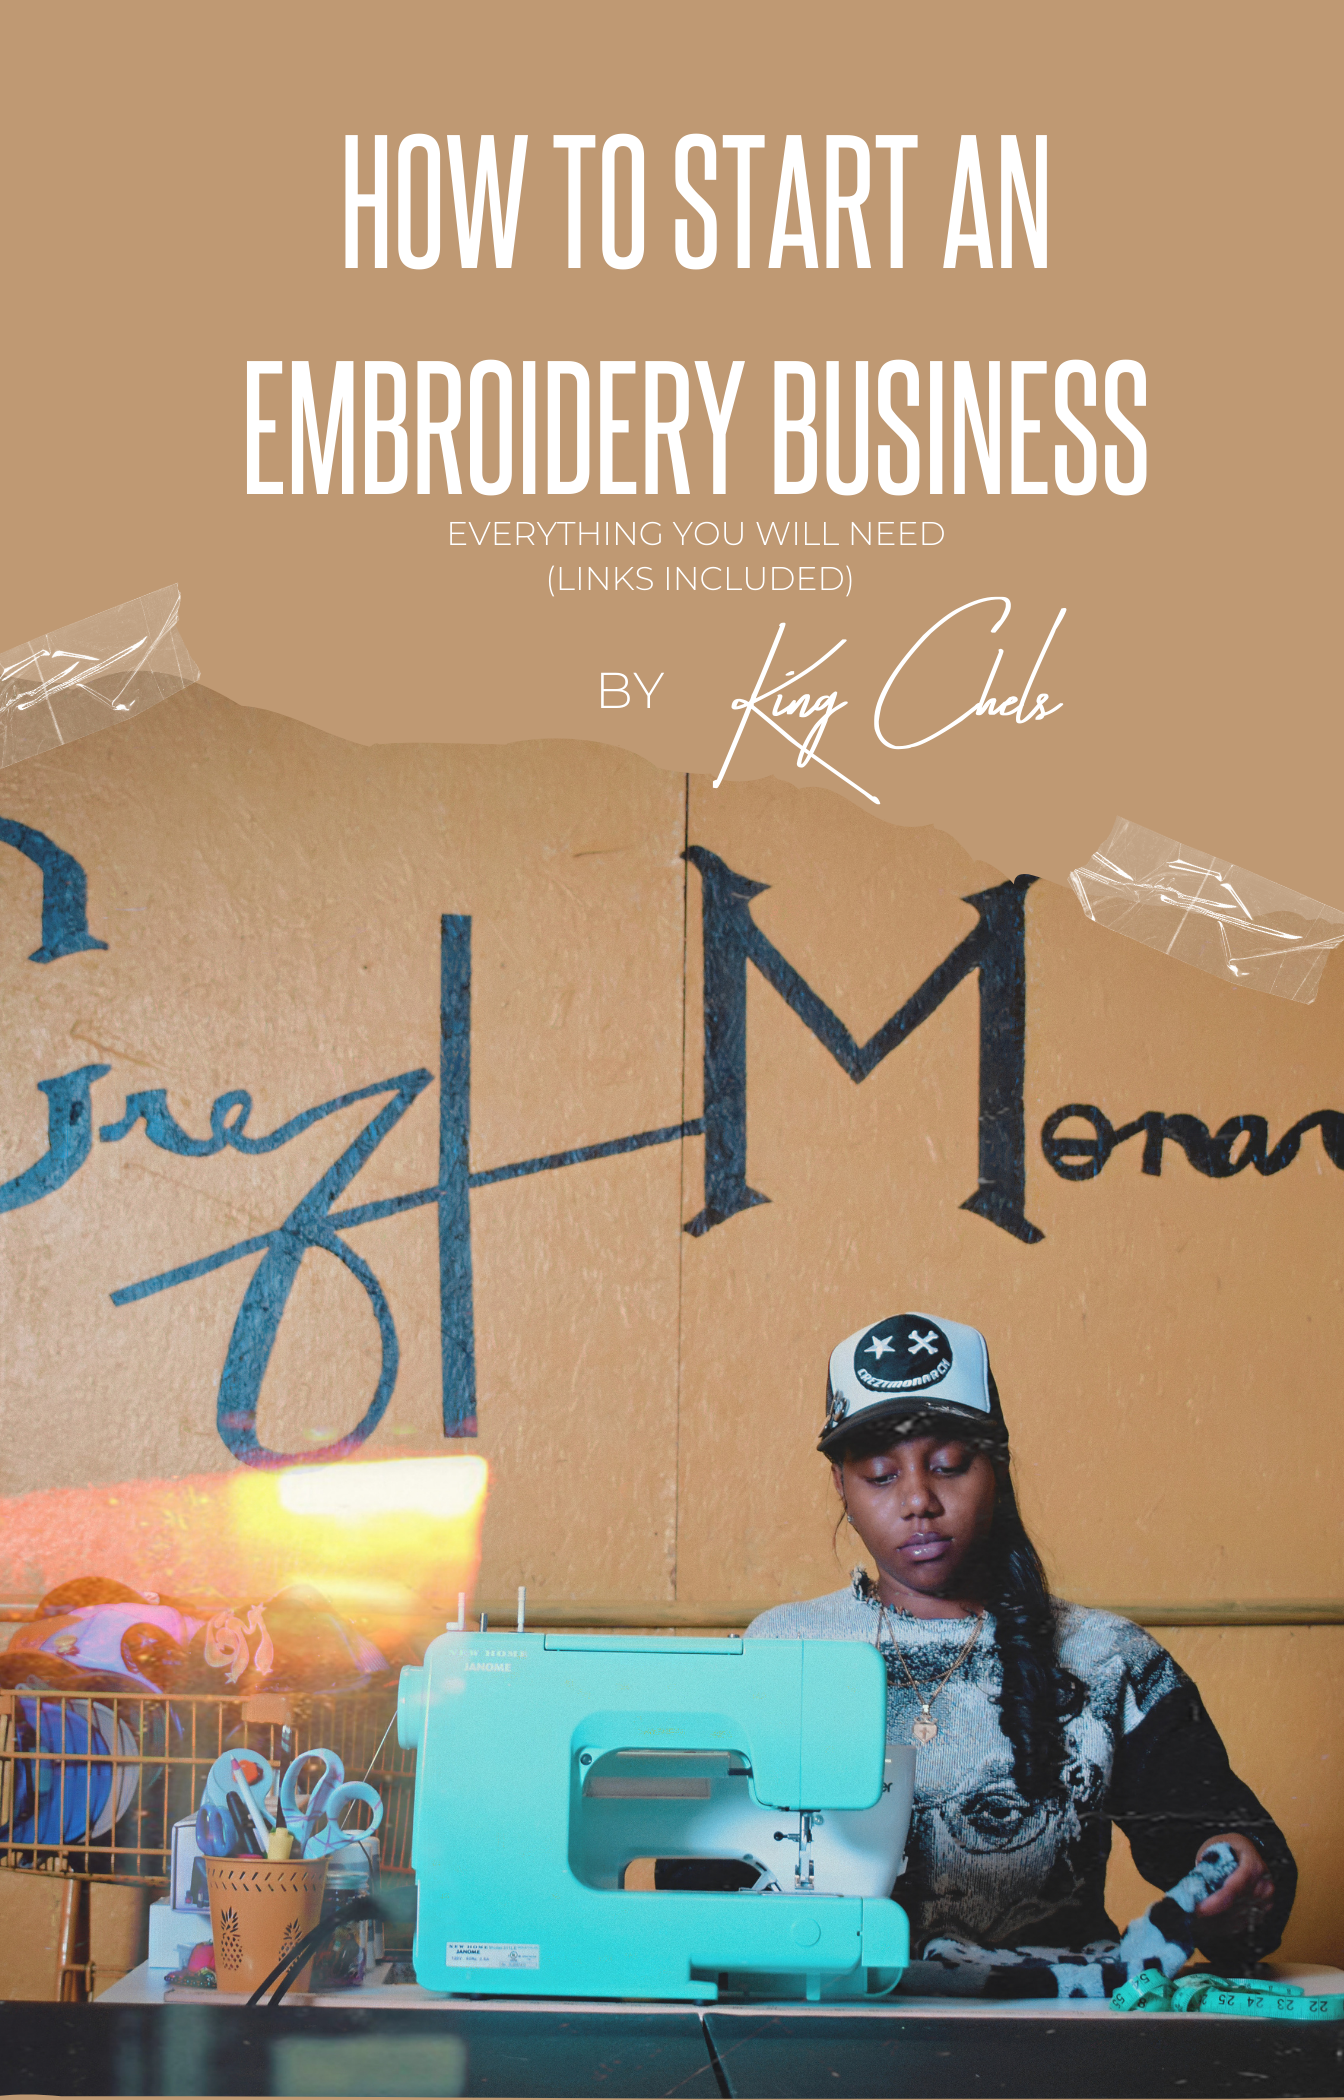 How To Start an Embroidery Business EBook